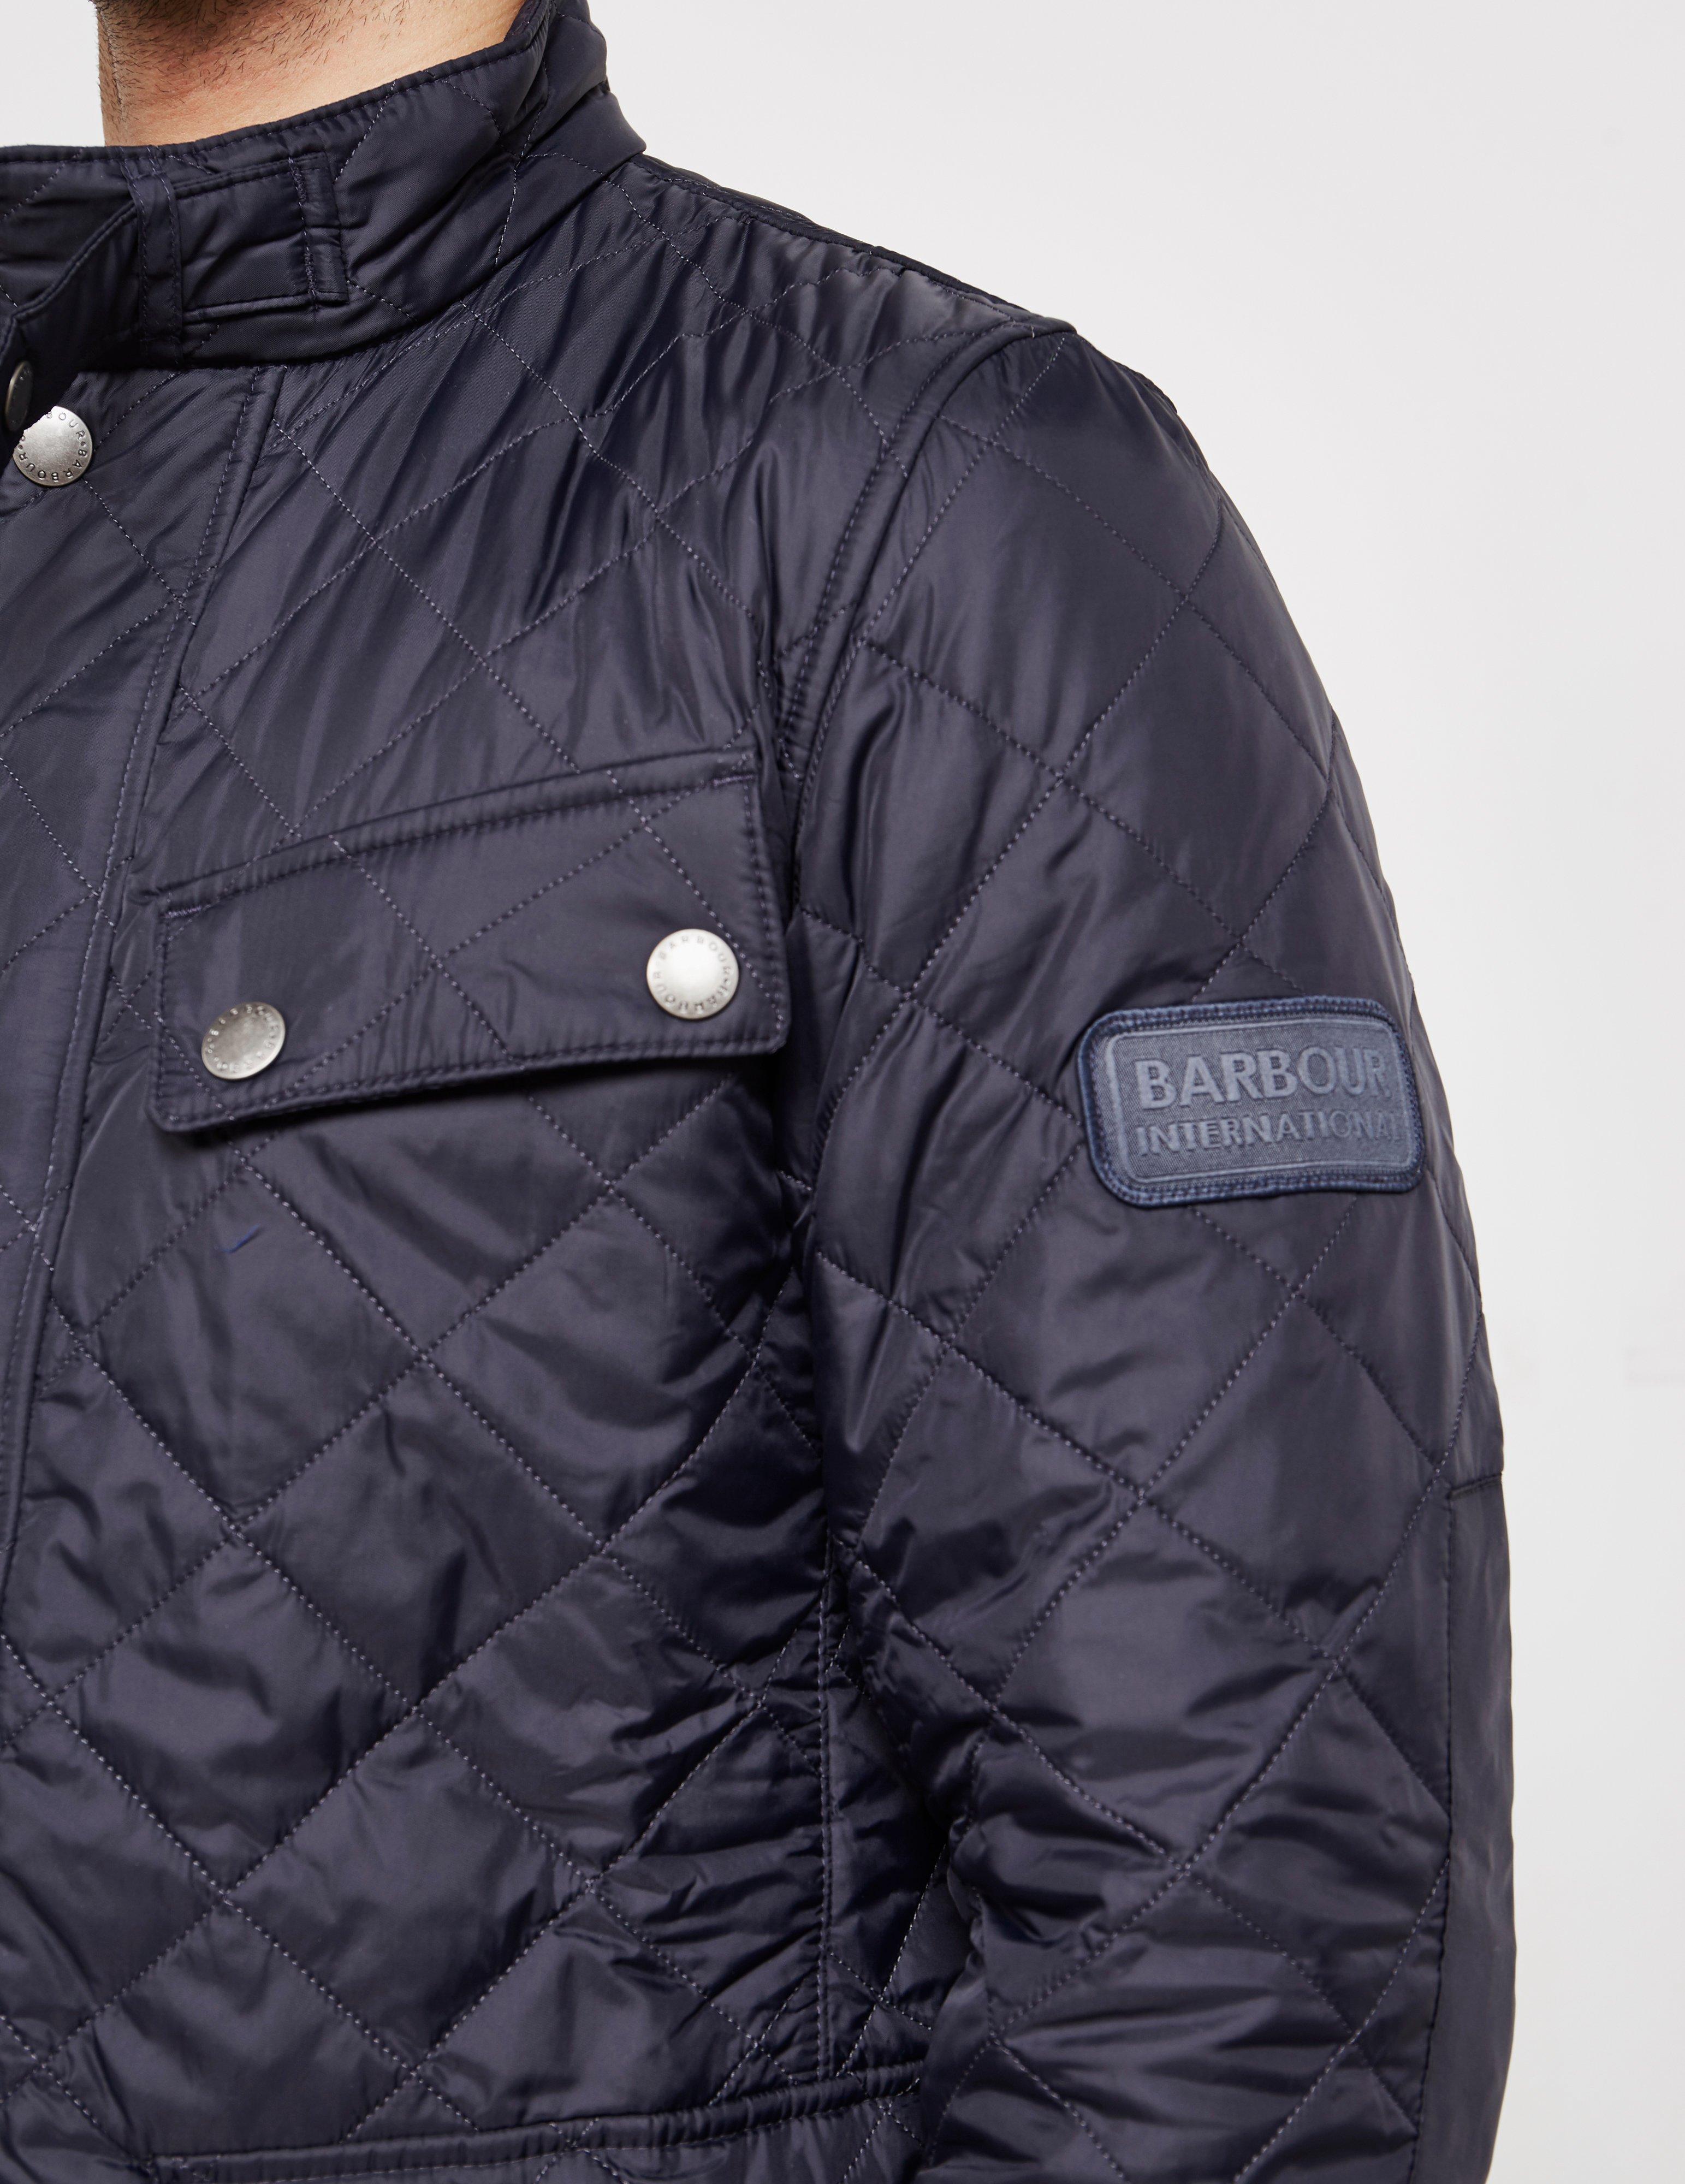 Barbour Cotton Ariel Quilted Jacket Navy Blue for Men - Lyst